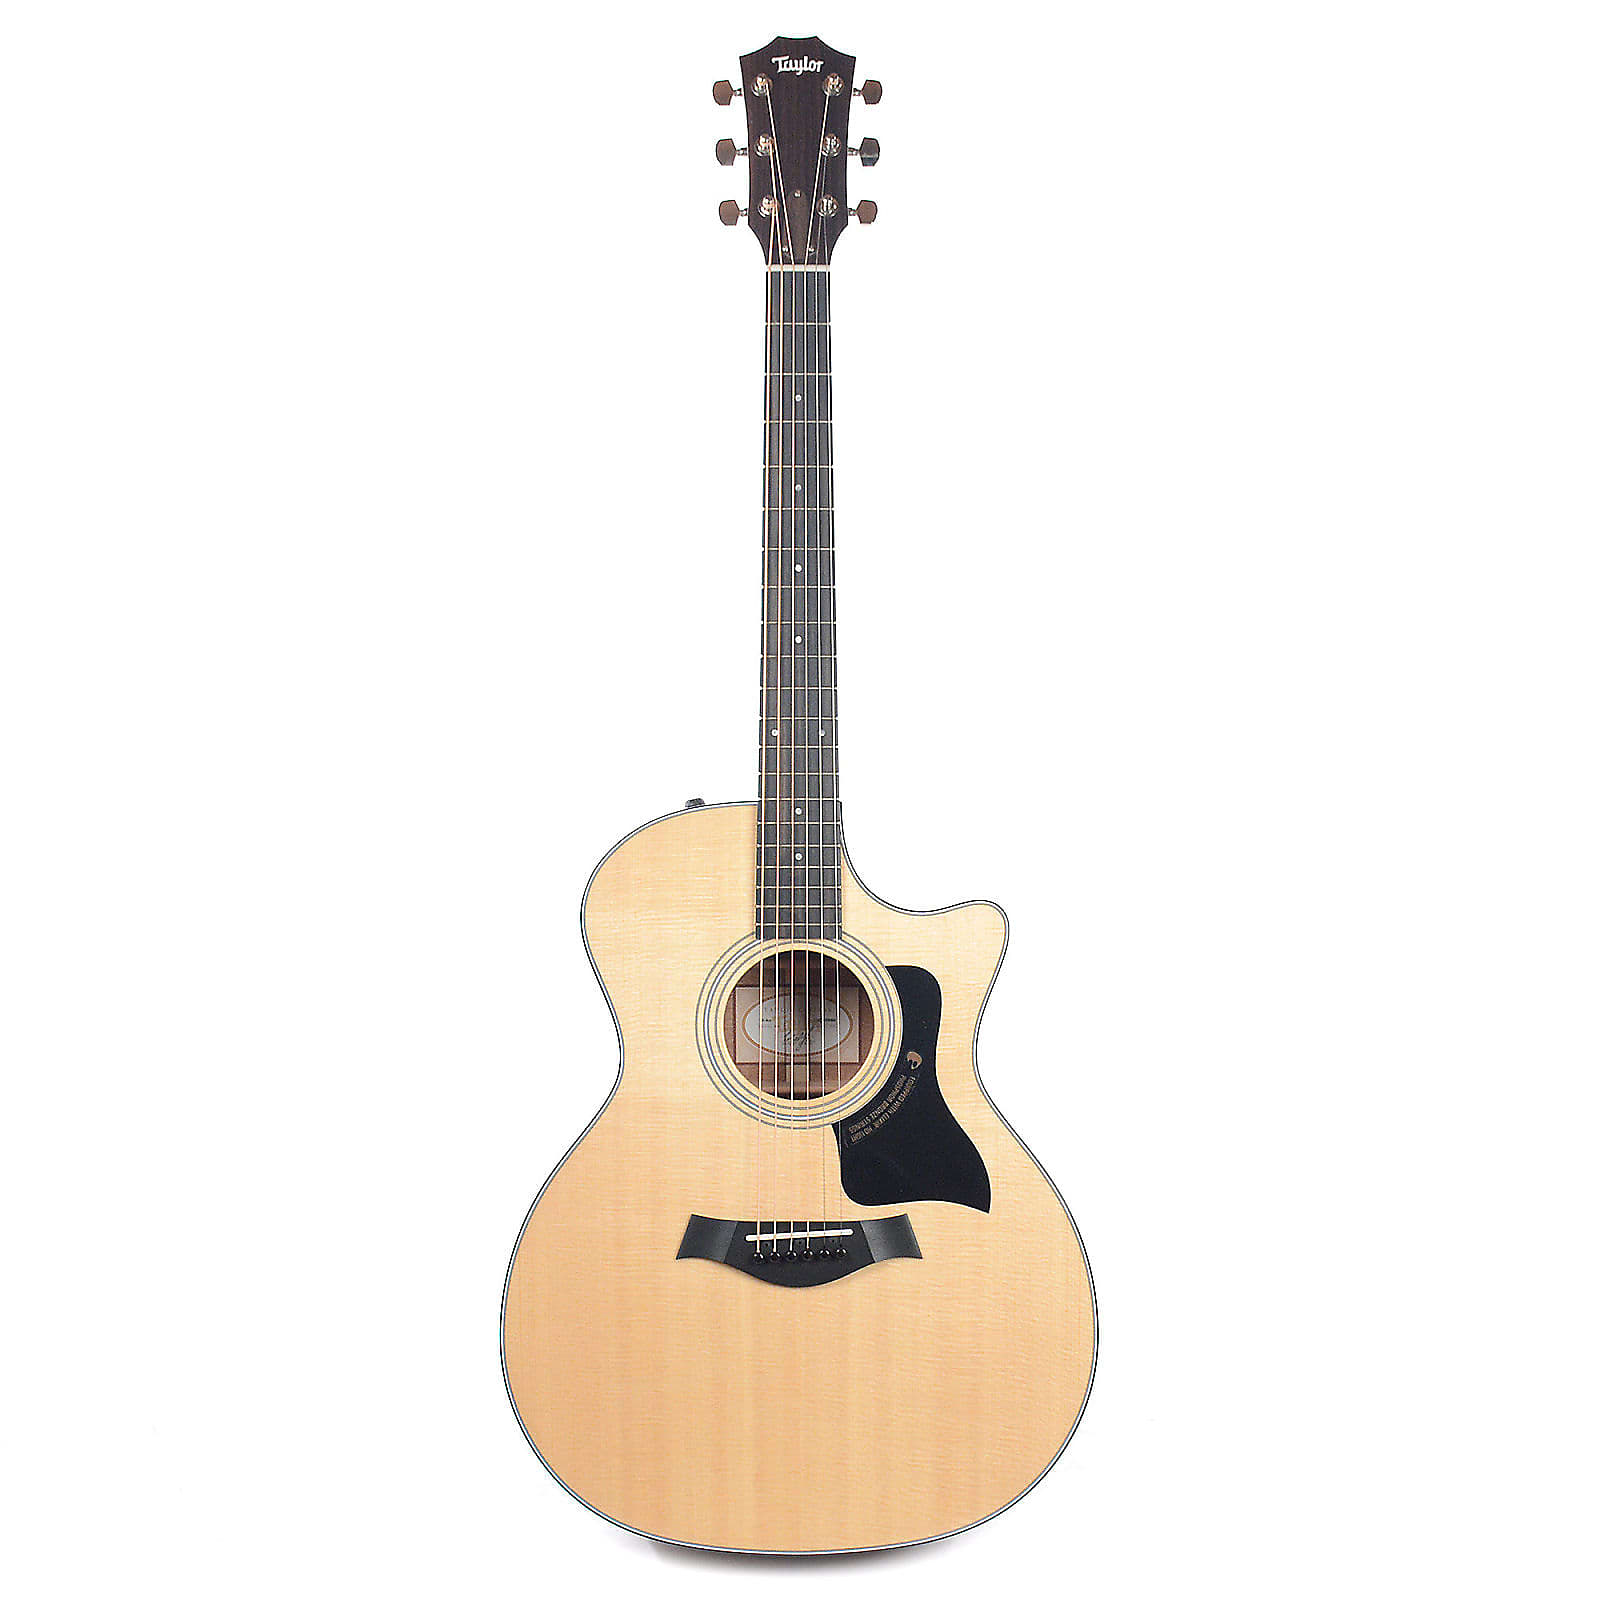 Taylor 314ce with ES2 Electronics 2014 - 2018 | Reverb